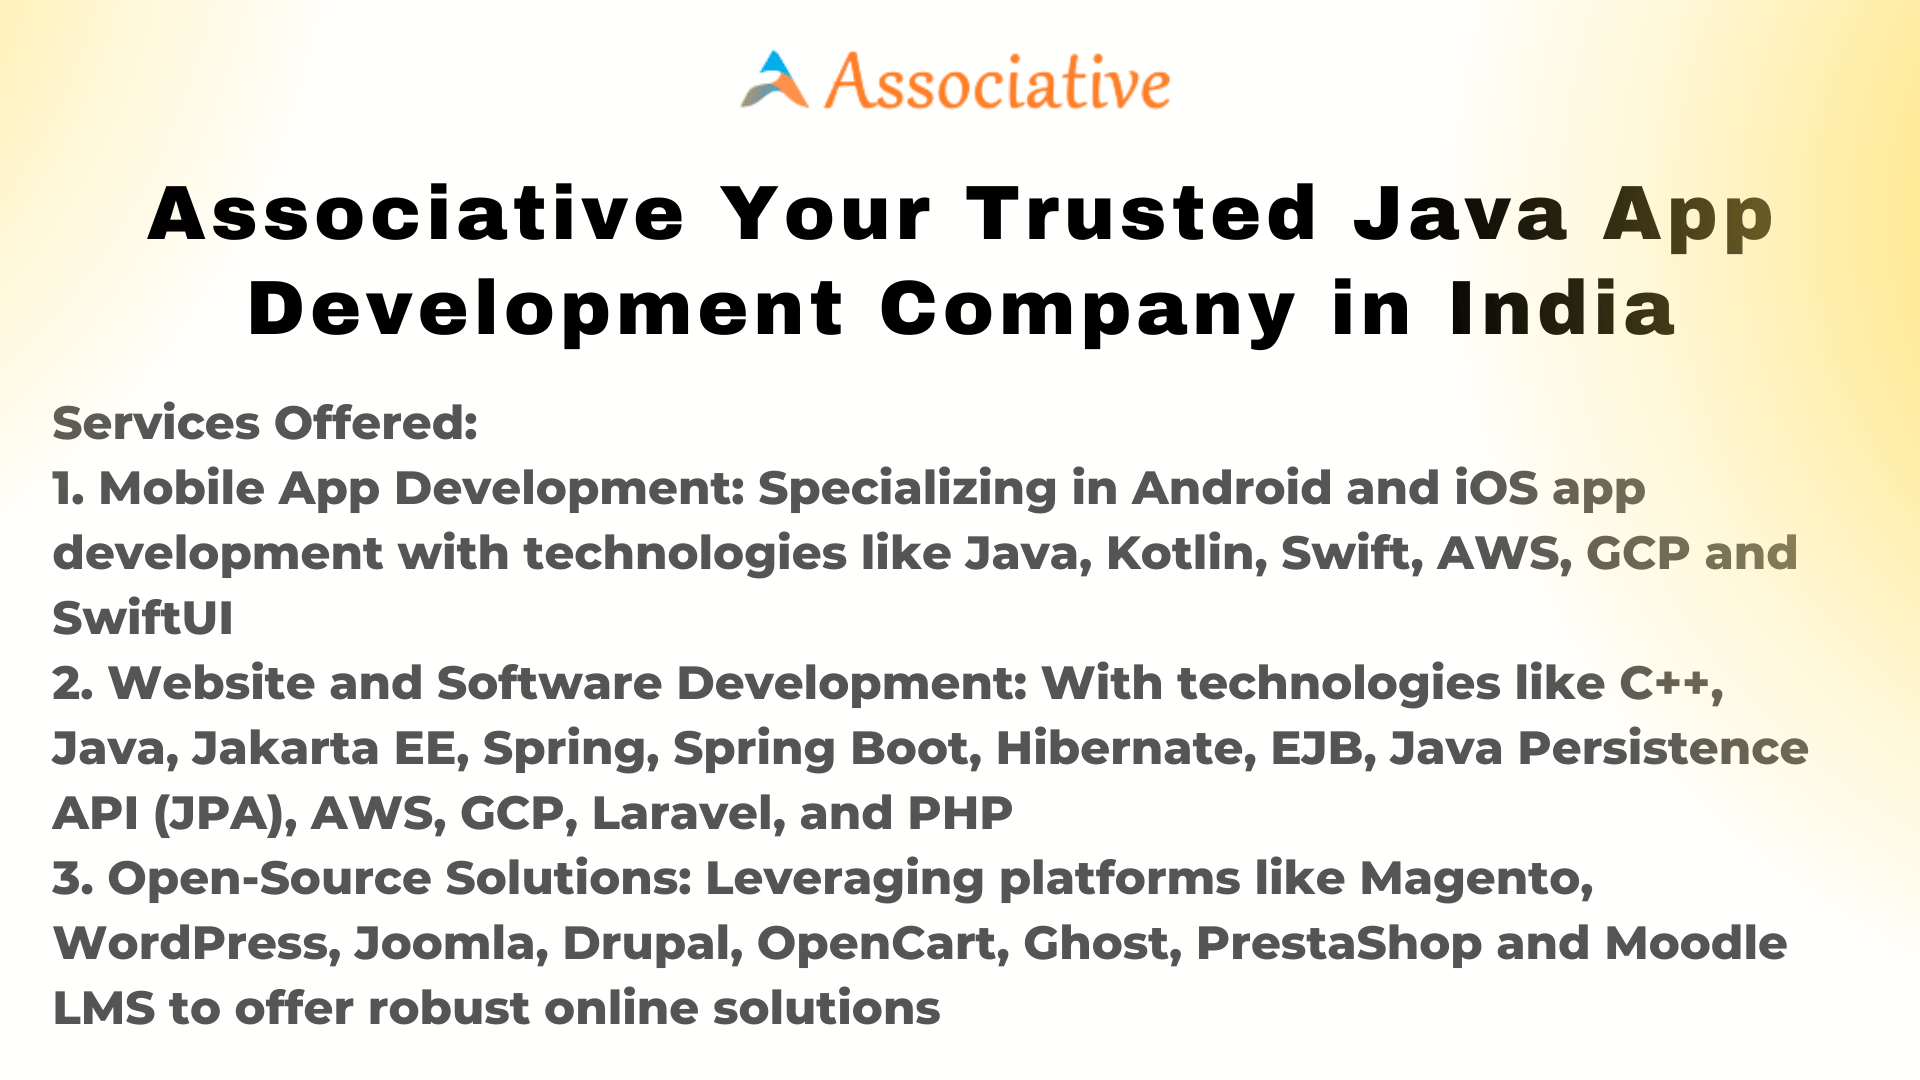 Associative Your Trusted Java App Development Company in India